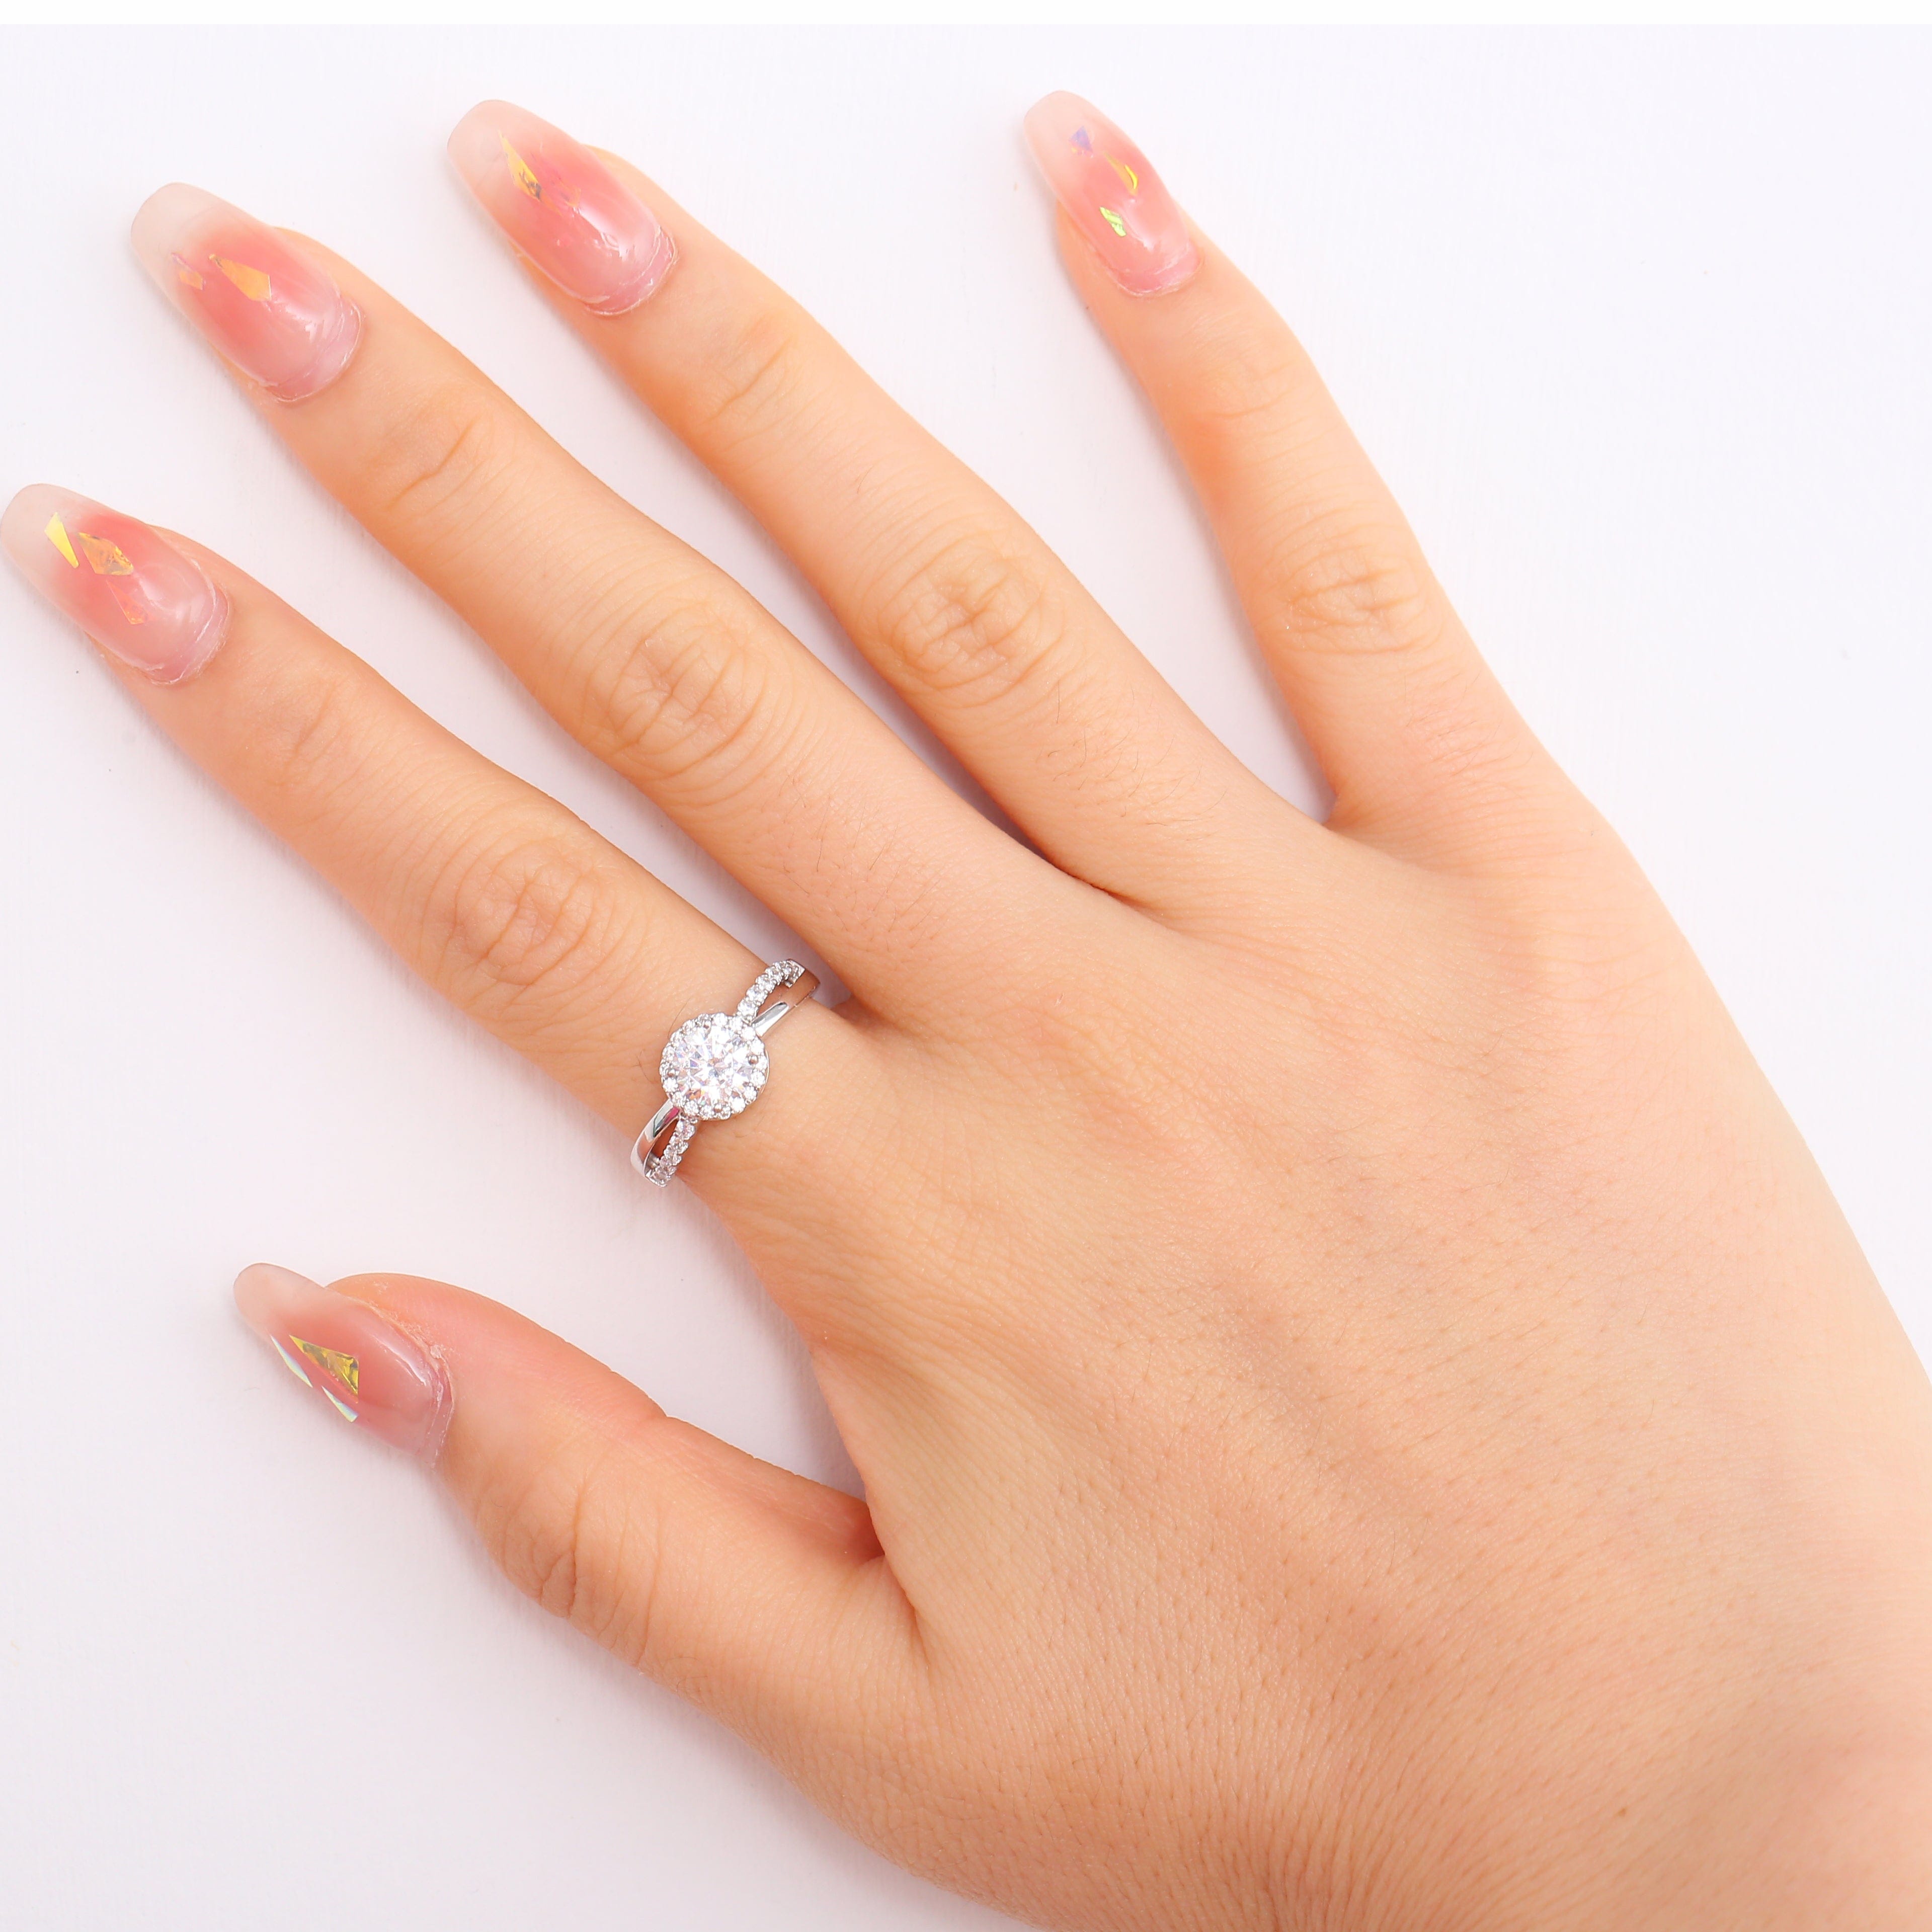 FANCIME "Always Brilliant" Halo Setting Sterling Silver Ring Model